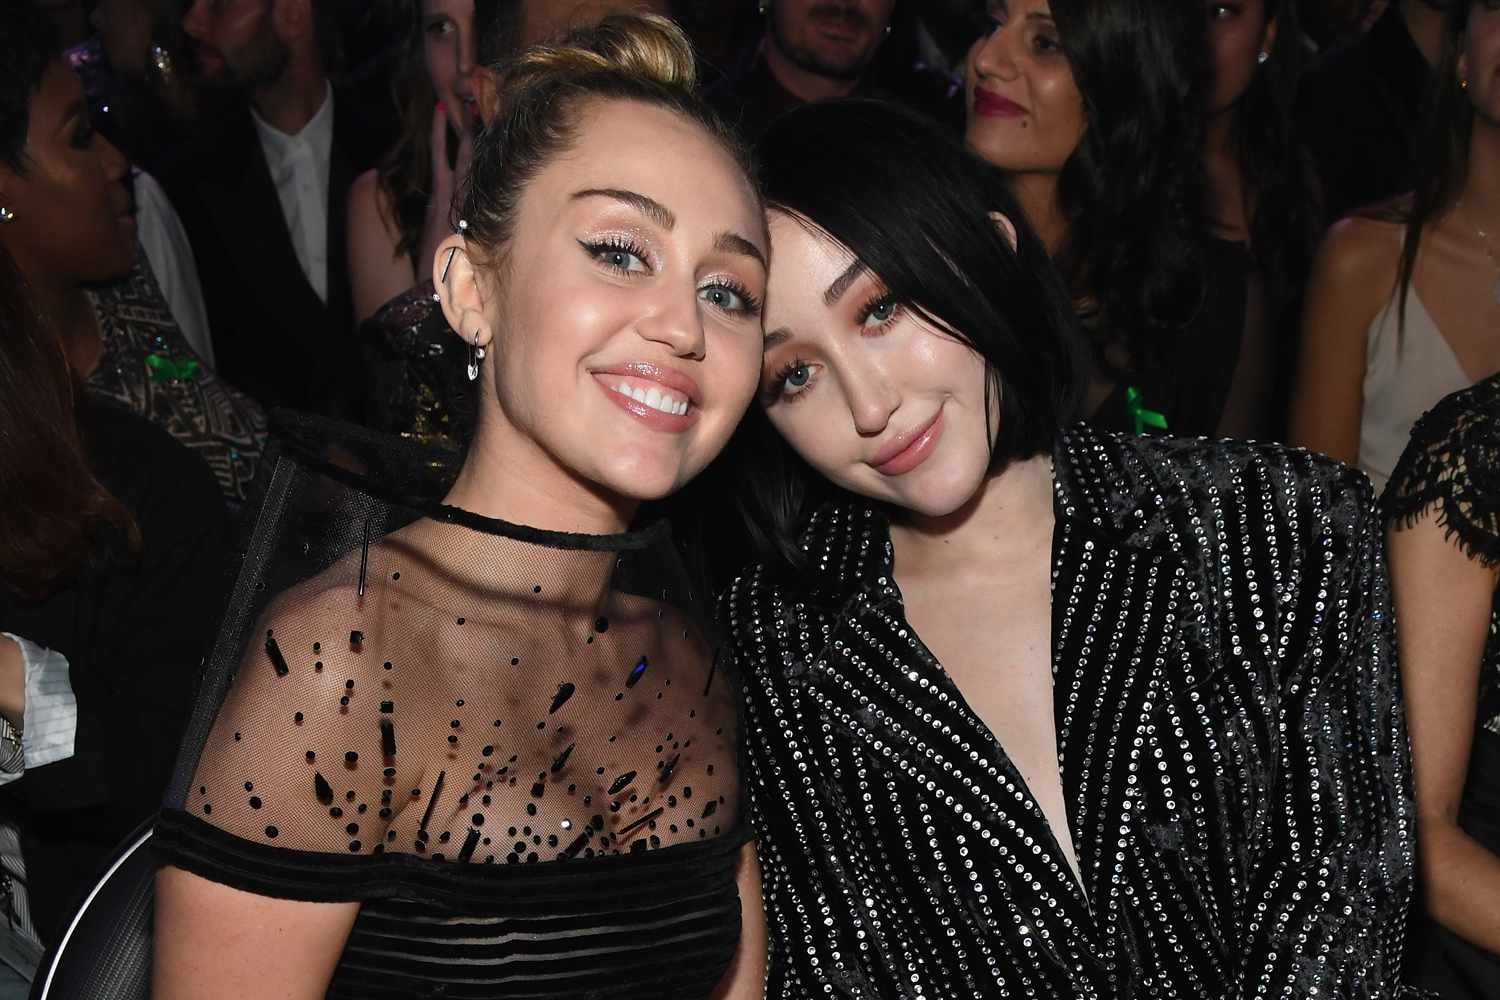 barry lacy recommends miley cyrus sister nude pic